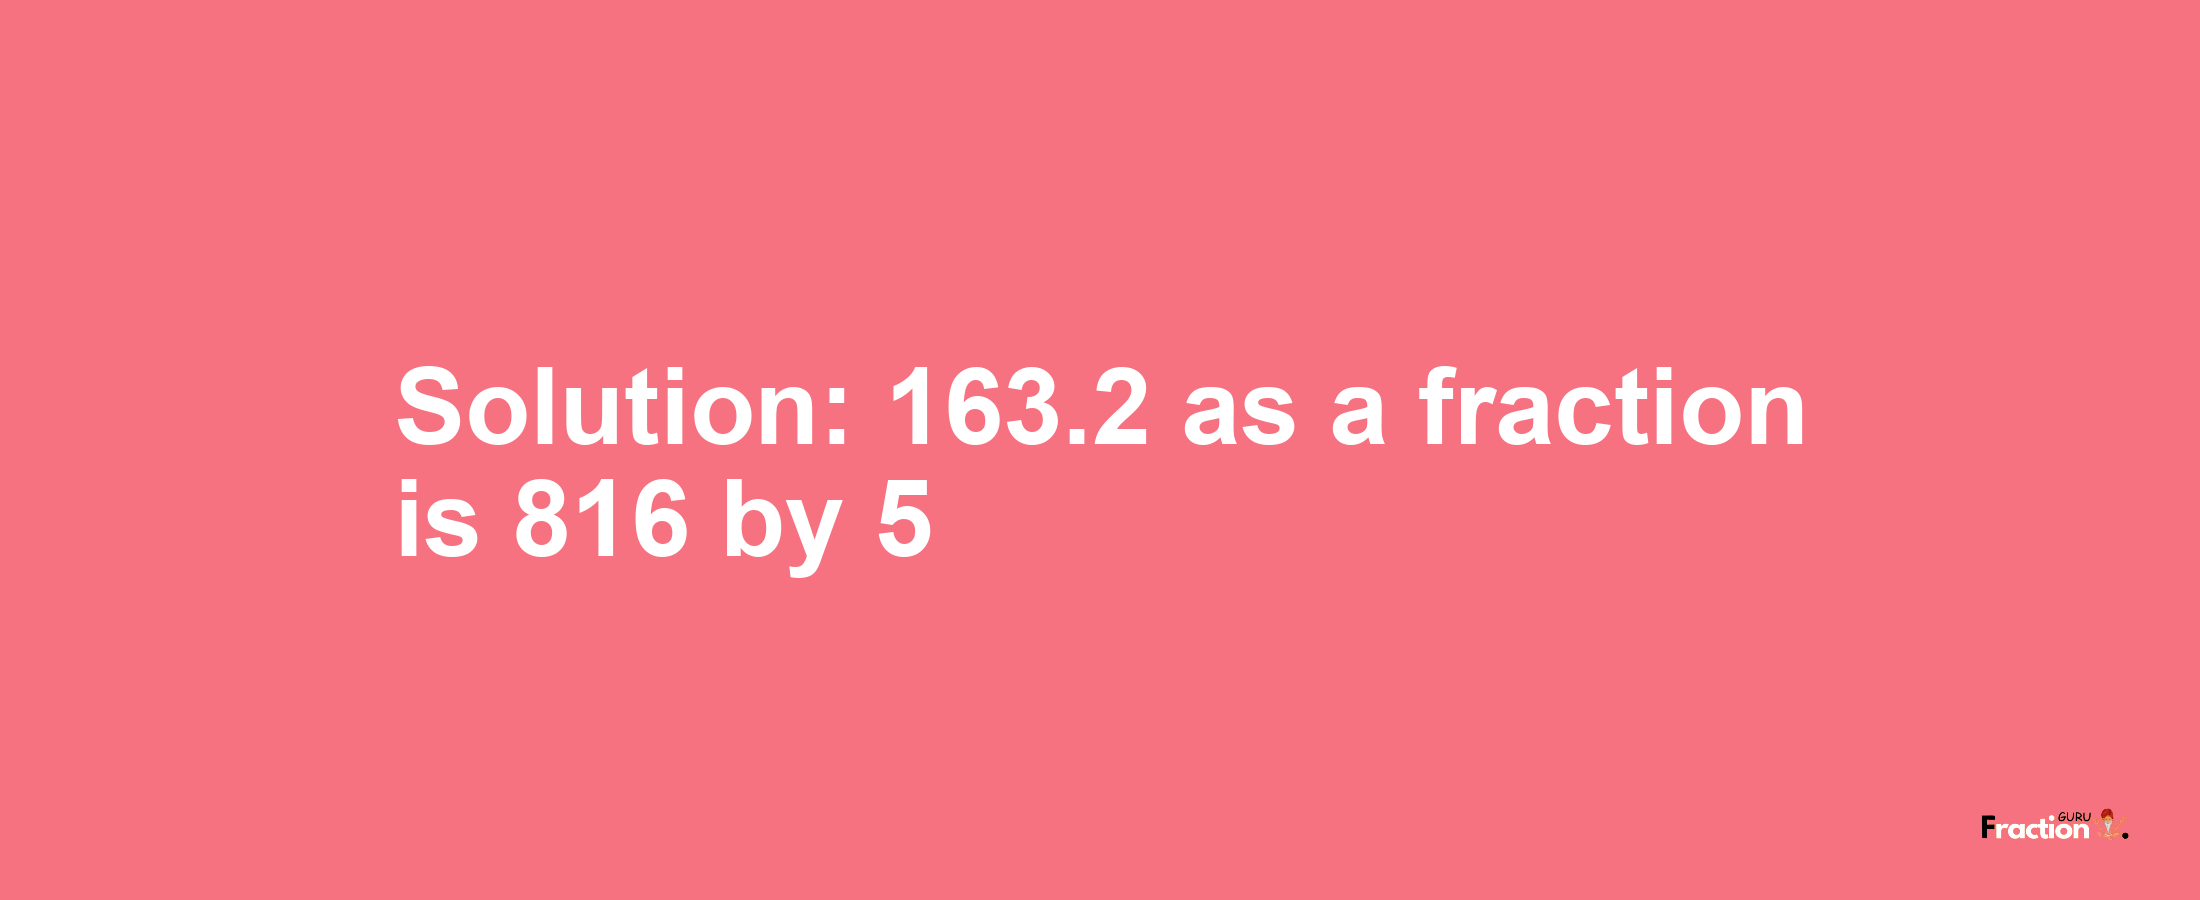 Solution:163.2 as a fraction is 816/5